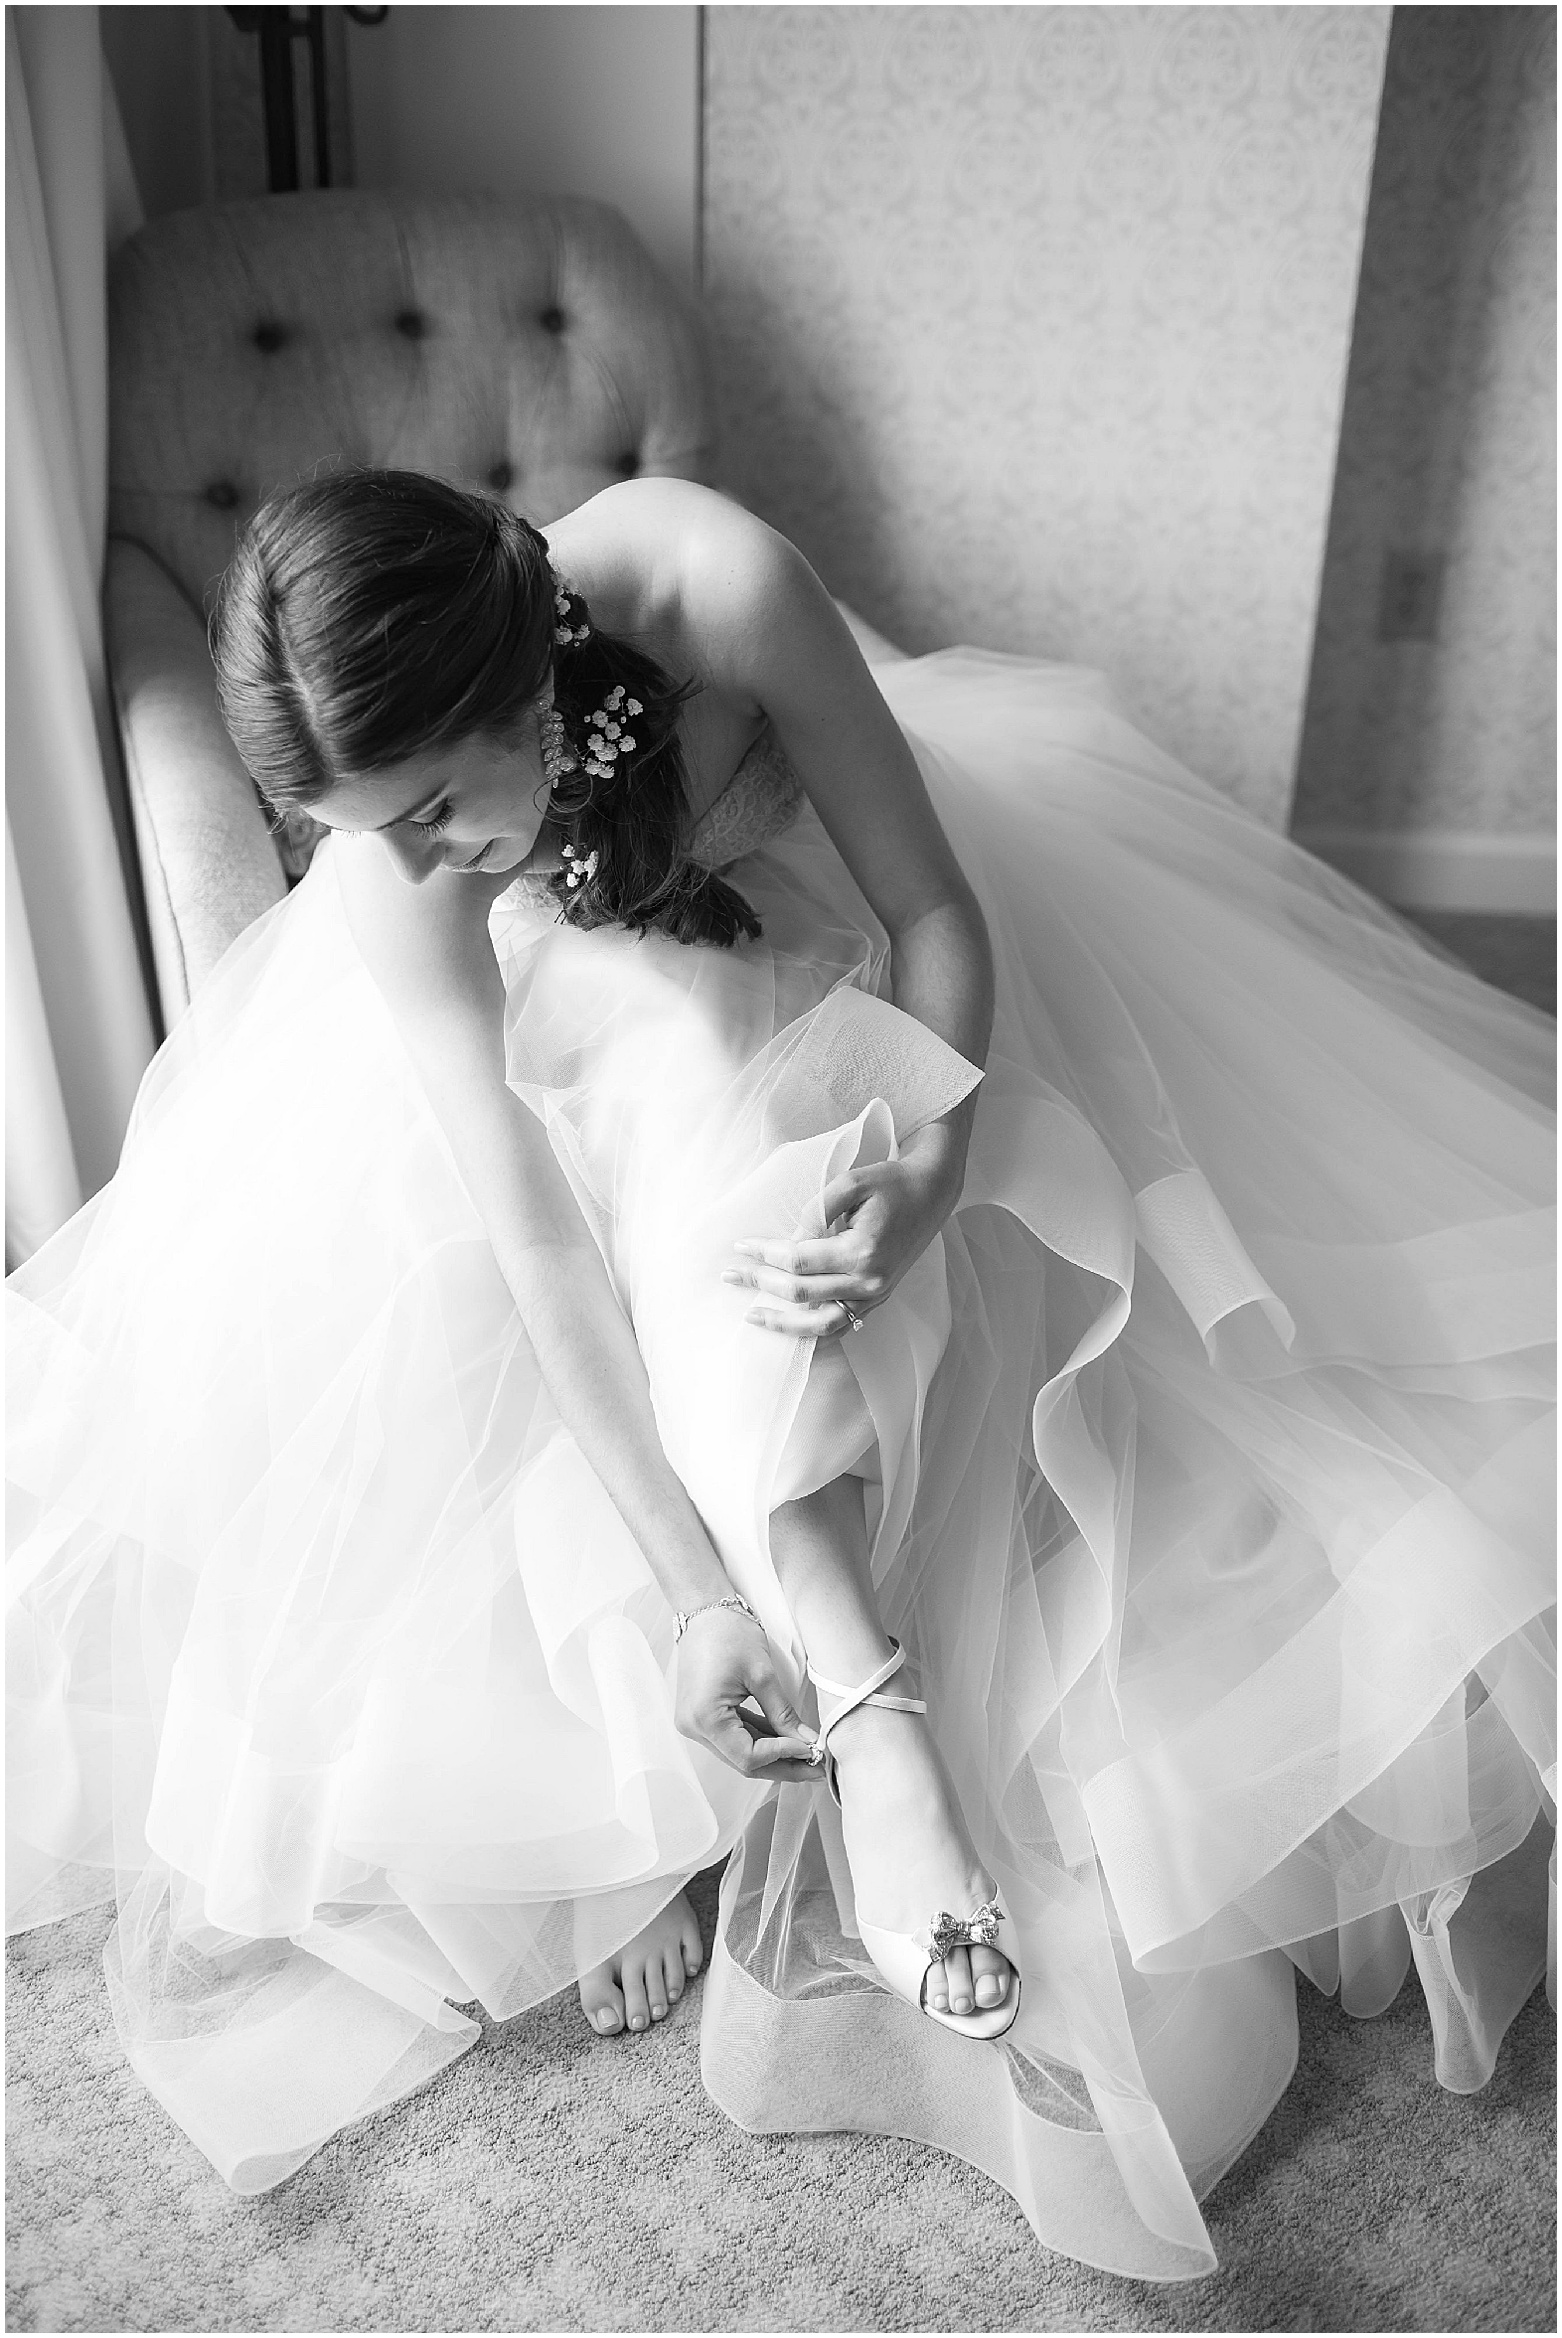 View More: http://hopetaylorphotographyphotos.pass.us/kristen-and-anthony-wedding